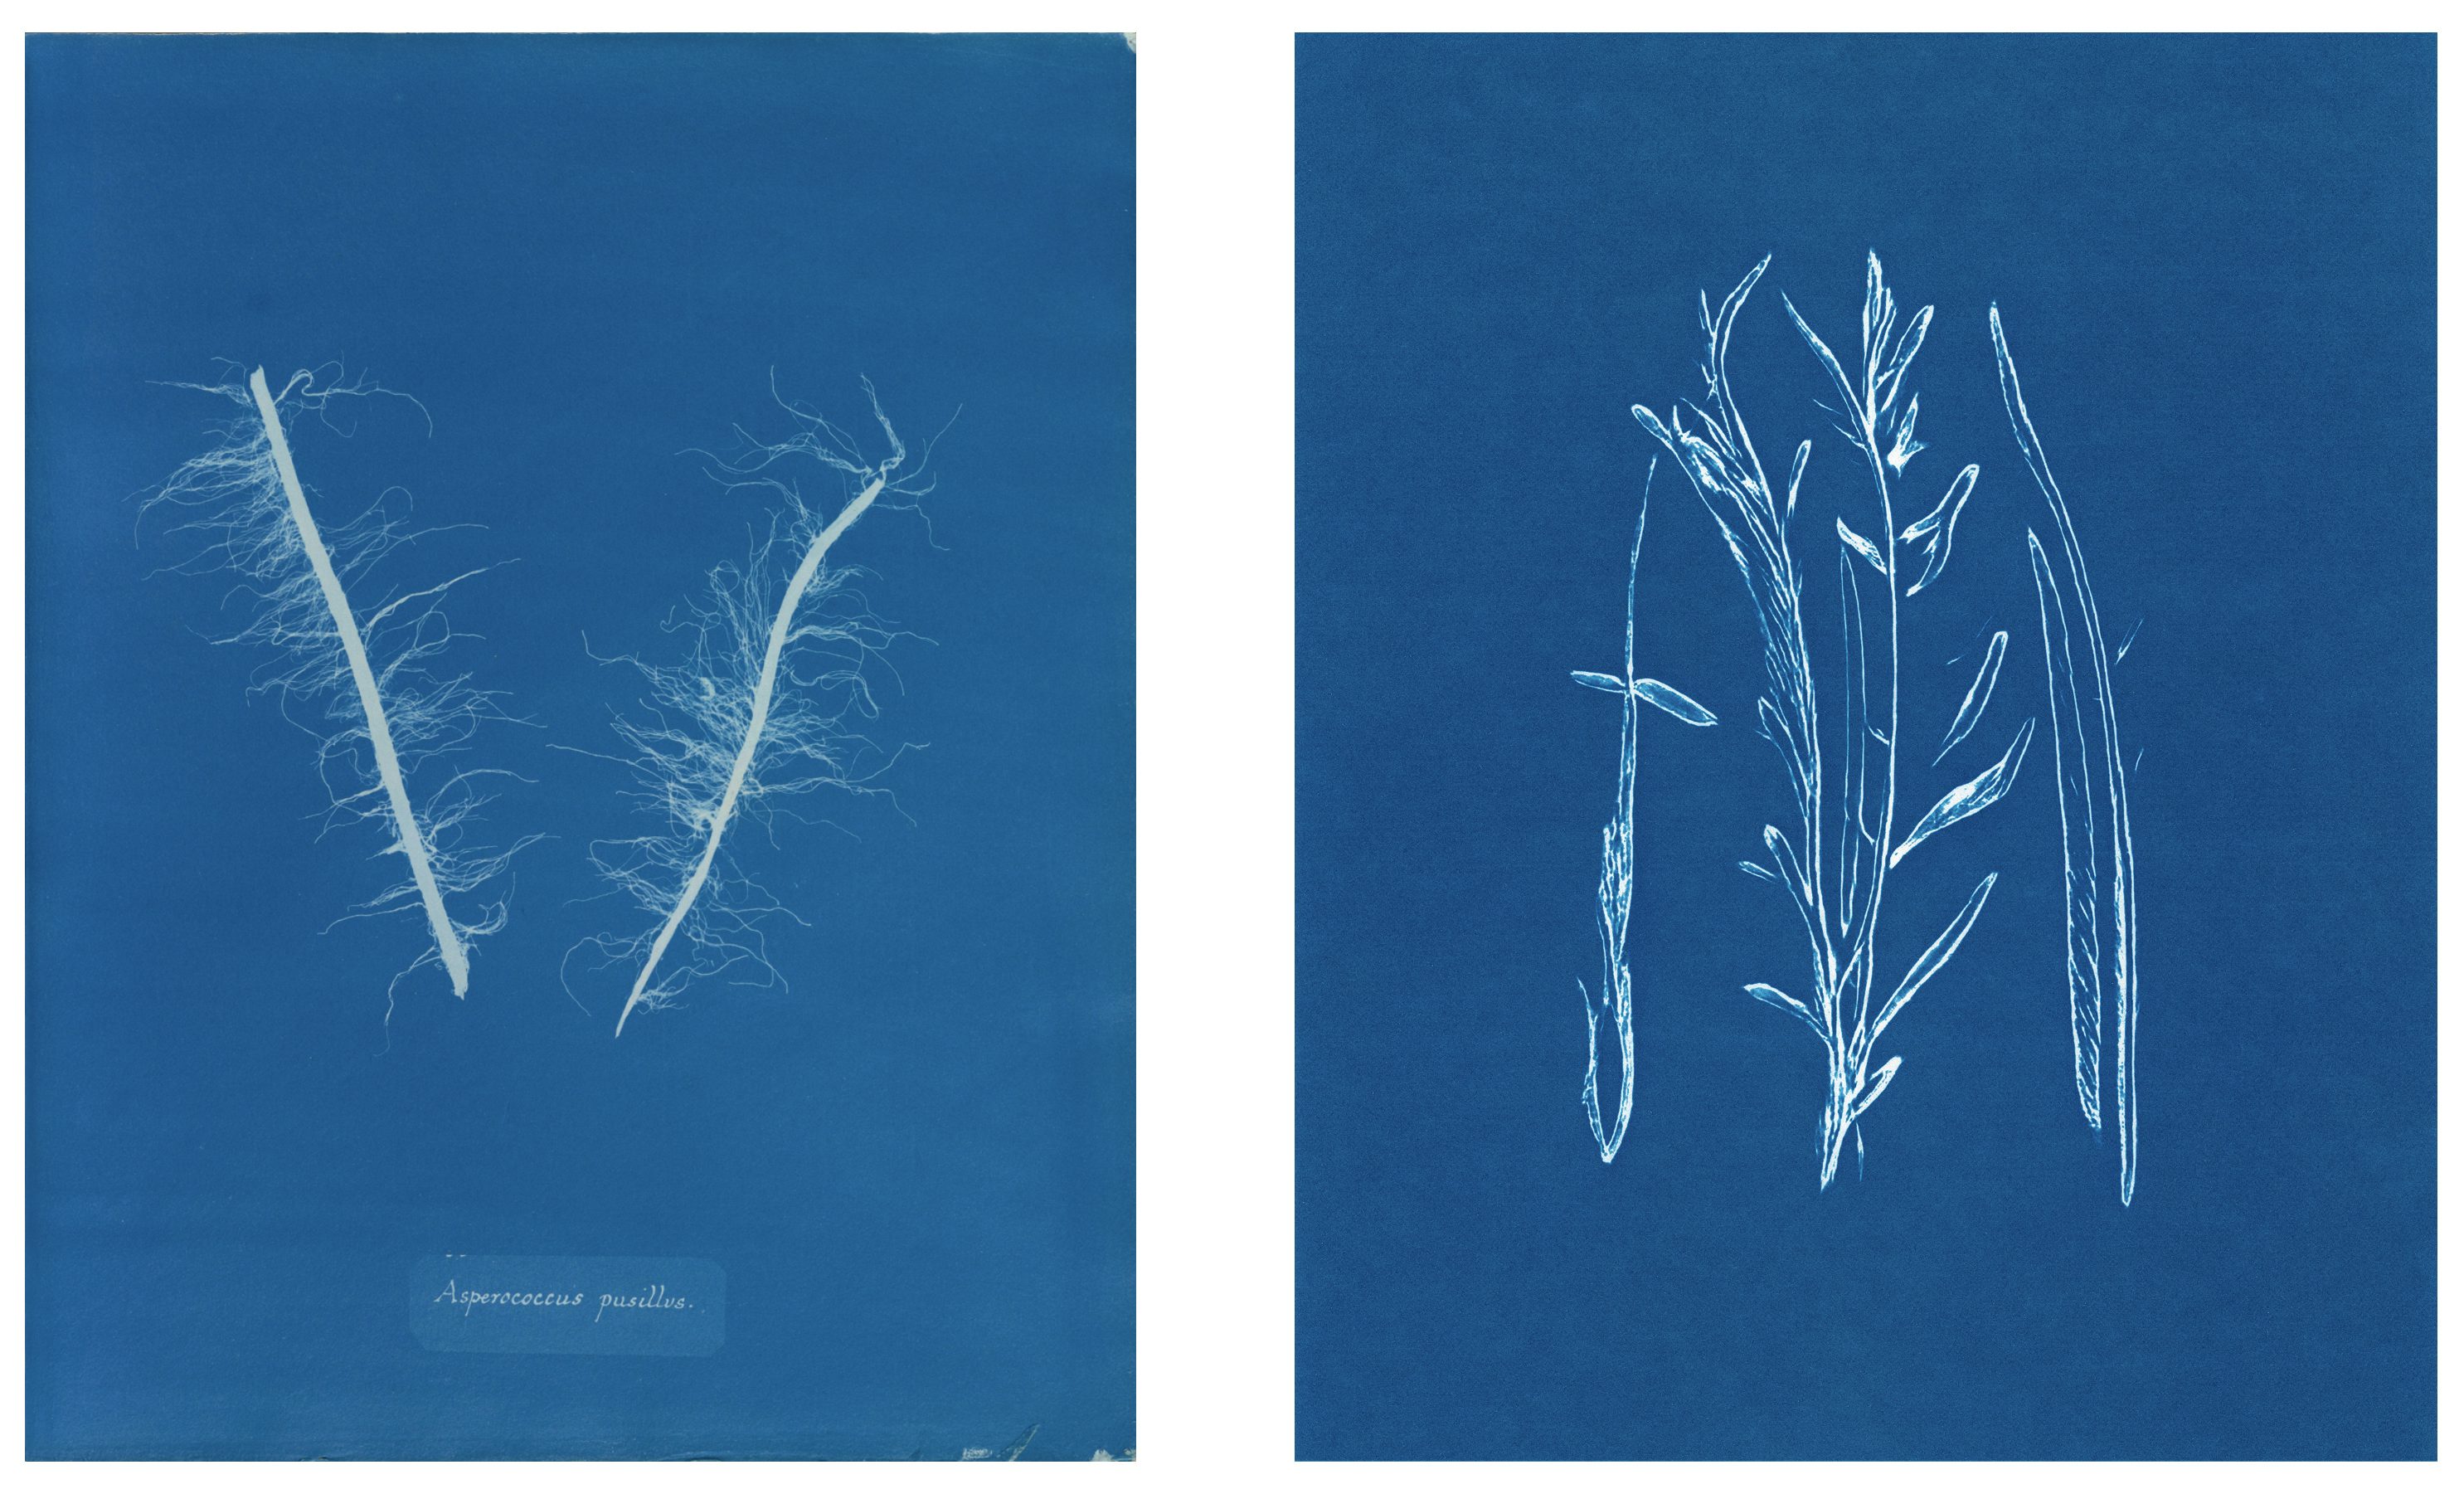 Left: Anna Atkins, British Algae. Right: In Translation #14 by Claudia Pawlak, Obscura Foundry Commission.